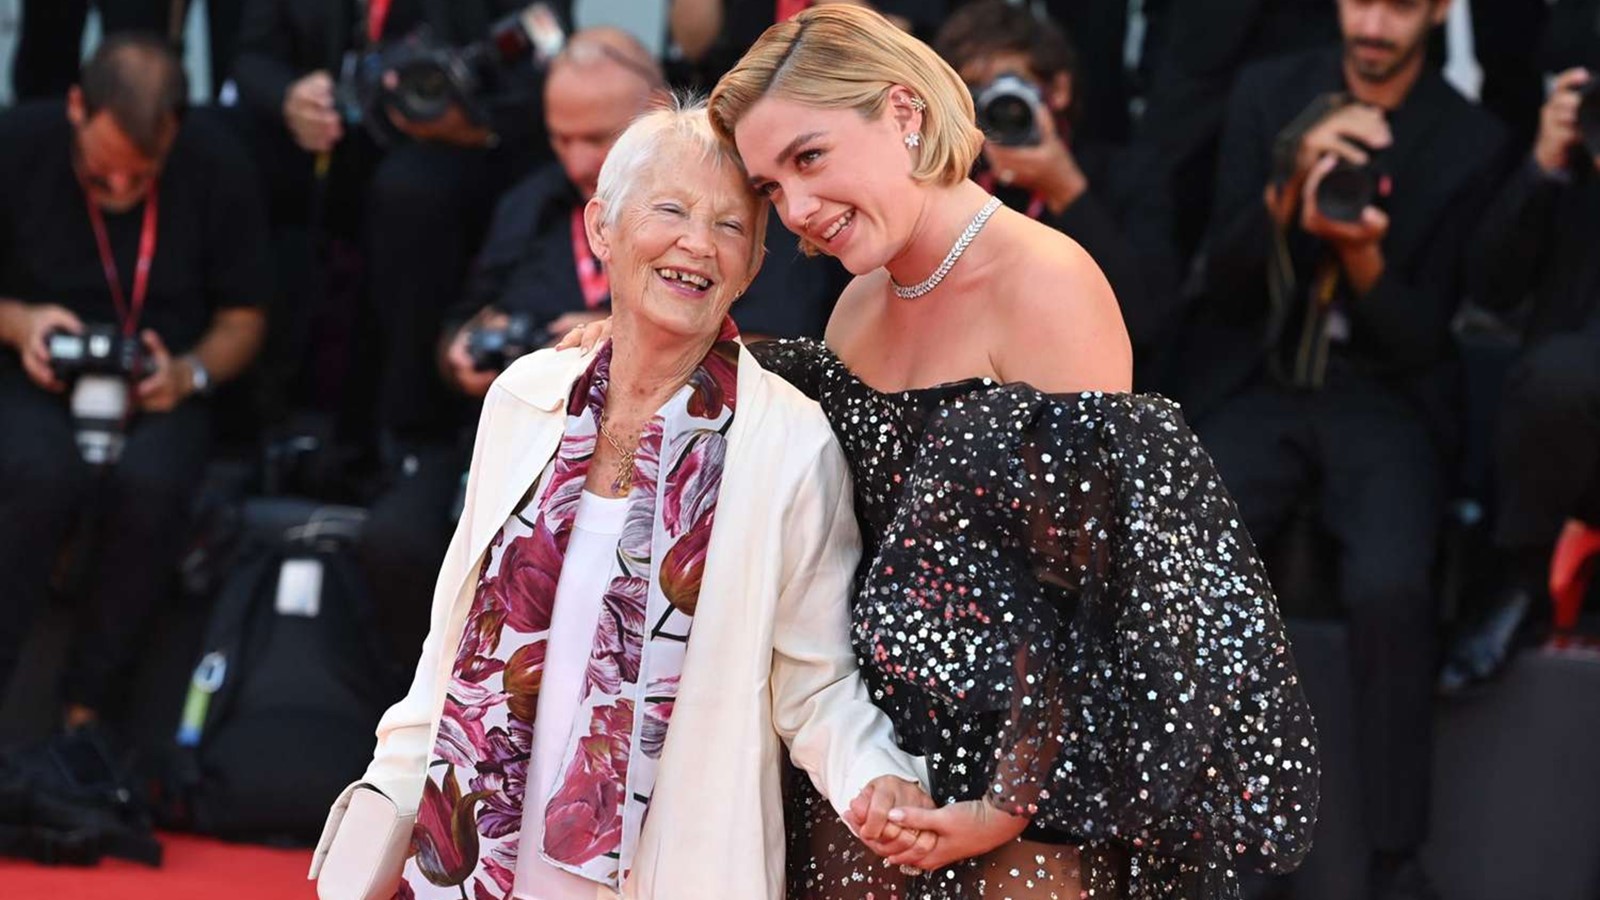 Florence Pugh: "My grandmother teased Chris Pine that she was more famous than him"